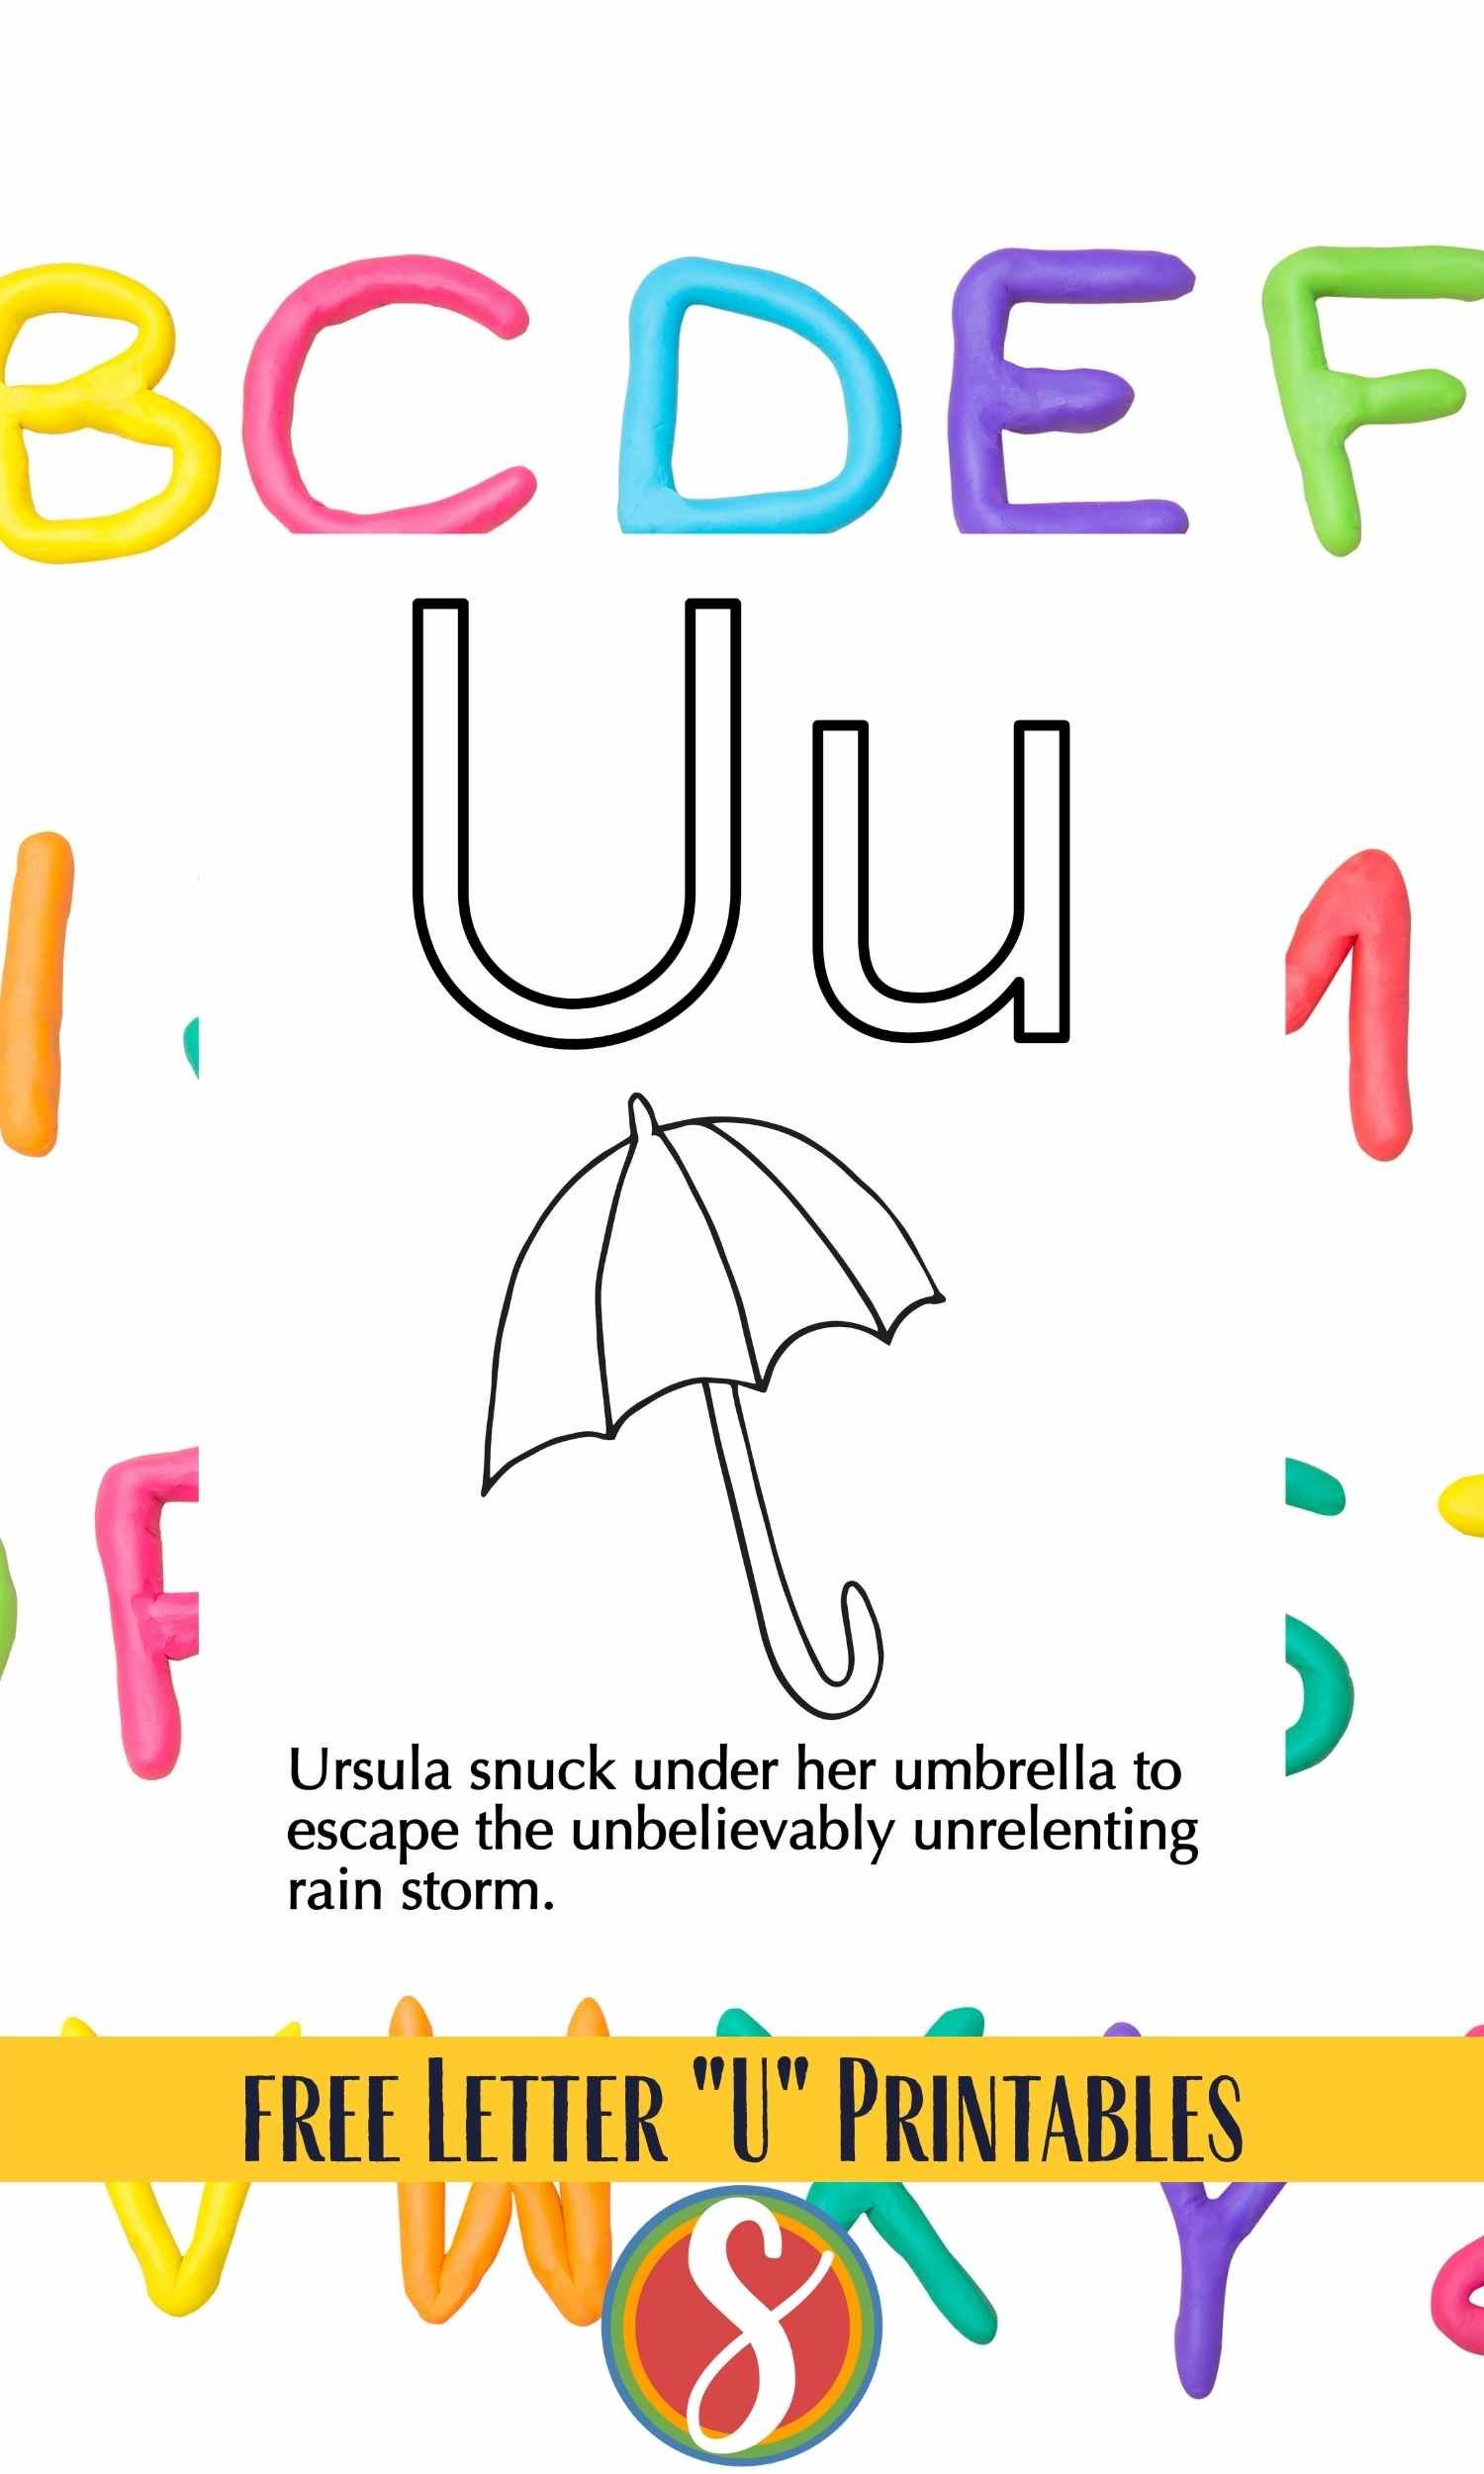 Outline of letters "Uu" over a simple umbrella drawing to color over a silly sentence with "u" words